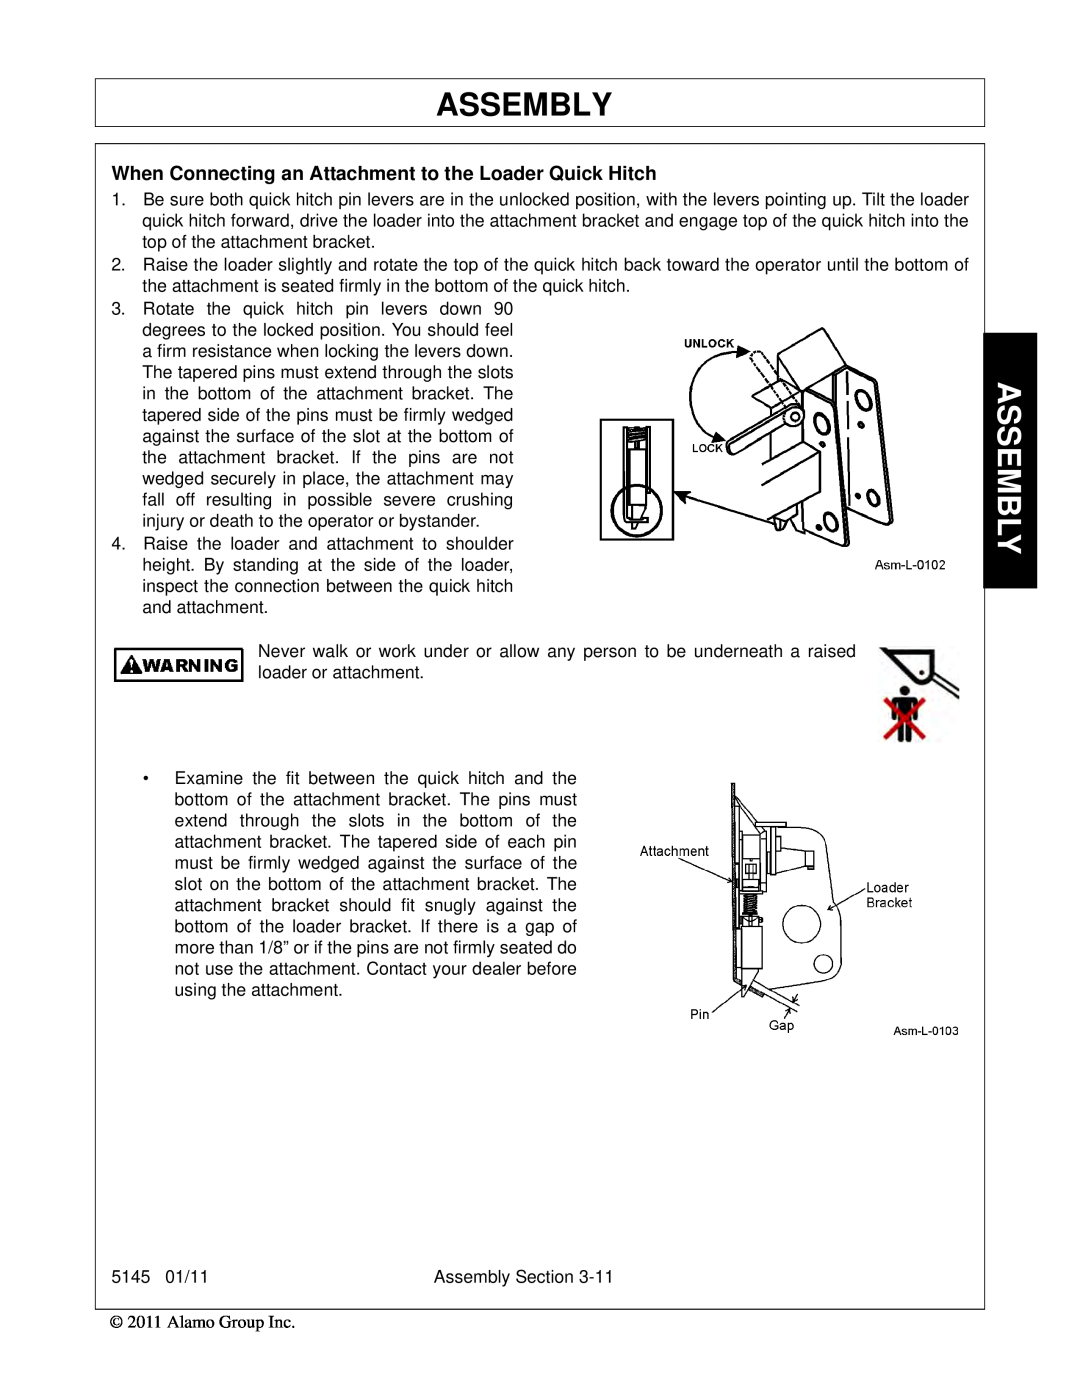 Bush Hog 5145 manual Assembly, When Connecting an Attachment to the Loader Quick Hitch 